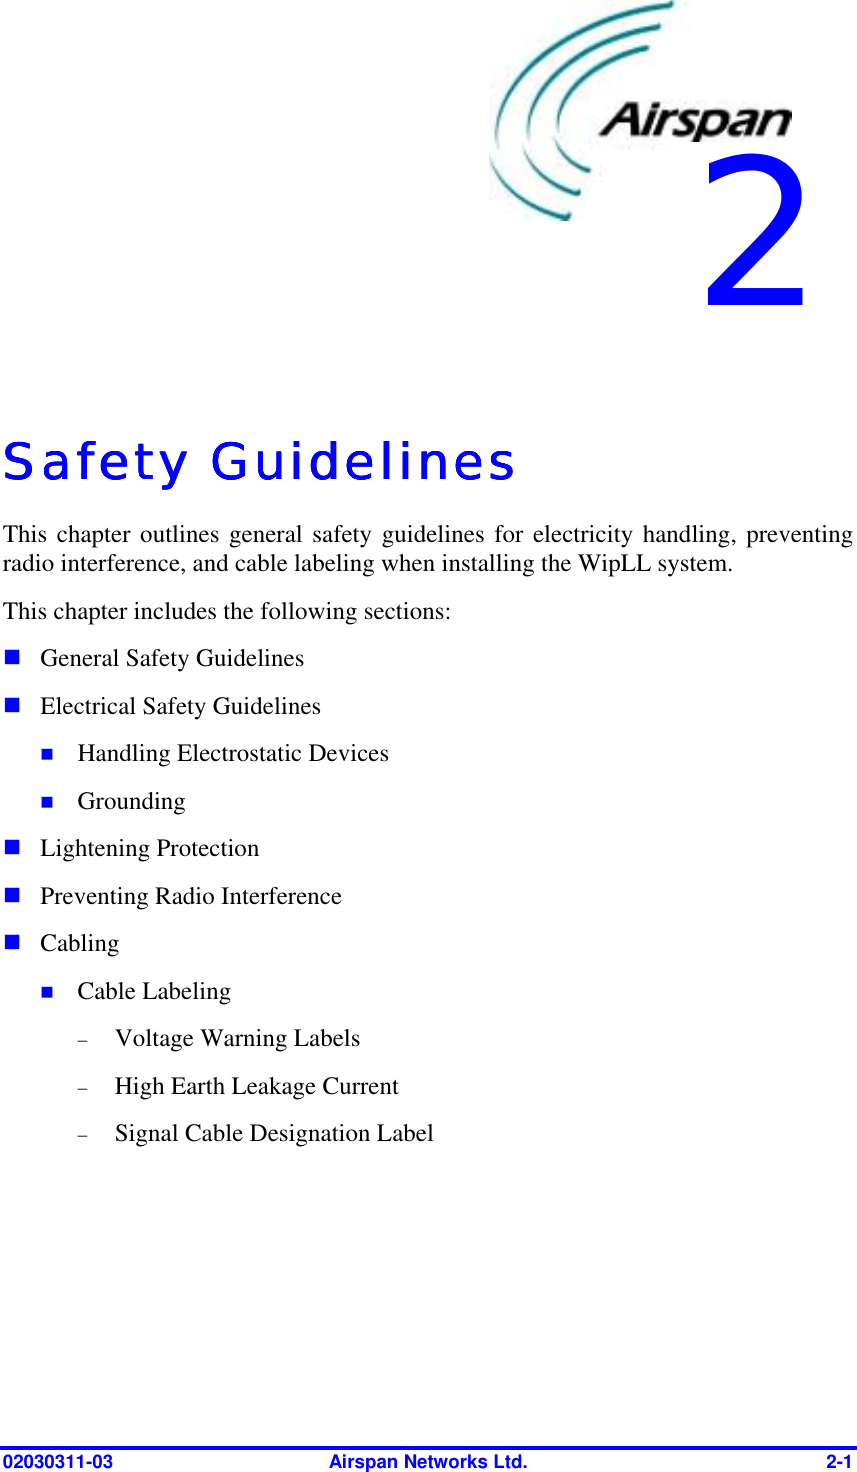  02030311-03  Airspan Networks Ltd.  2-1   Safety GuidelinesSafety GuidelinesSafety GuidelinesSafety Guidelines    This chapter outlines general safety guidelines for electricity handling, preventing radio interference, and cable labeling when installing the WipLL system. This chapter includes the following sections: ! General Safety Guidelines ! Electrical Safety Guidelines !  Handling Electrostatic Devices !  Grounding ! Lightening Protection ! Preventing Radio Interference ! Cabling !  Cable Labeling −  Voltage Warning Labels −  High Earth Leakage Current −  Signal Cable Designation Label 2 